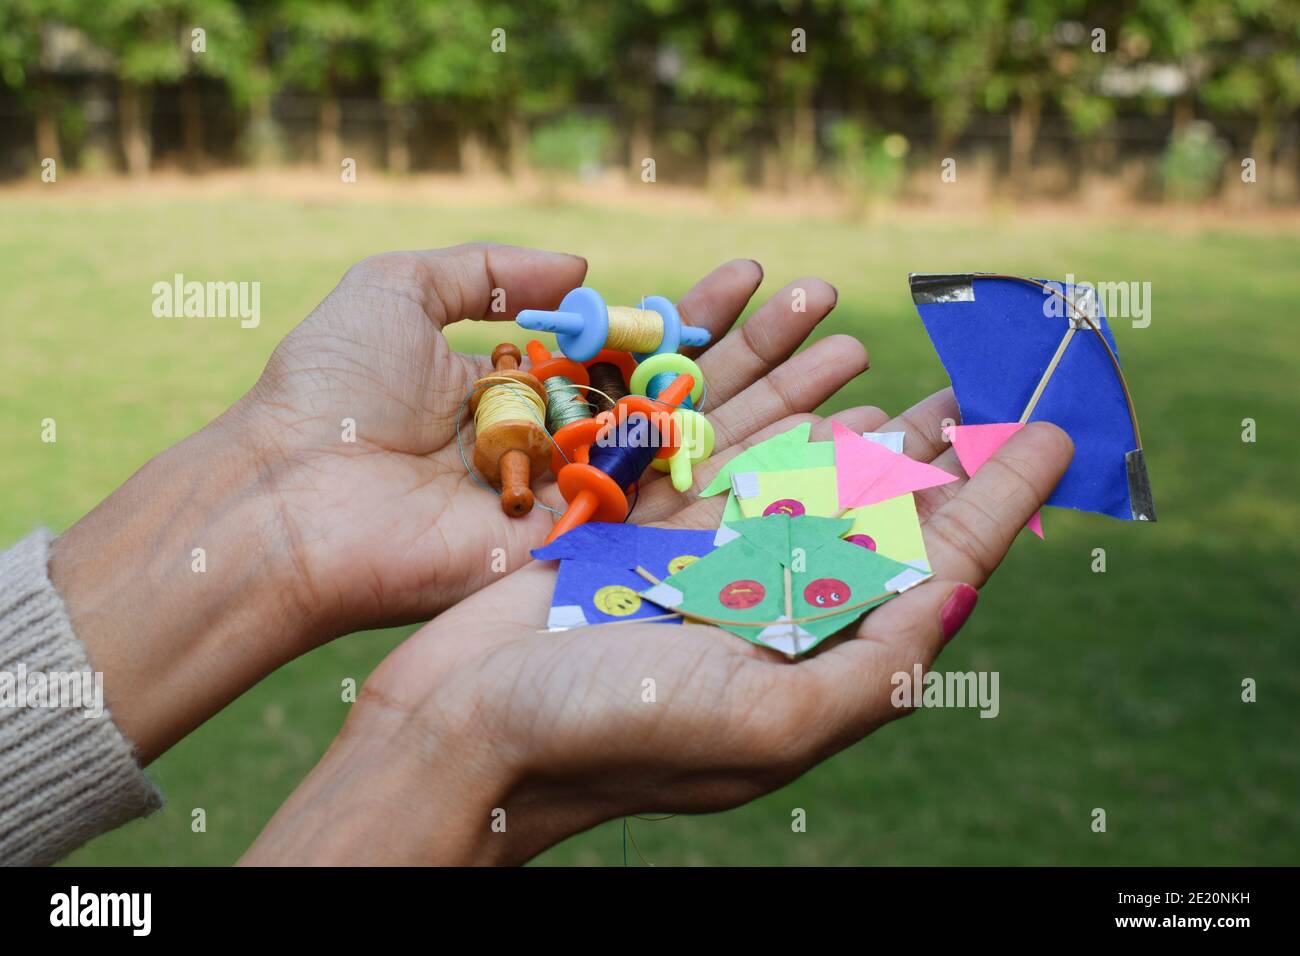 Collection of miniature spools and kites, thread rolls called as Manjha or maanja in hand palms. Toy spools manja on the occasion of kite flying festi Stock Photo